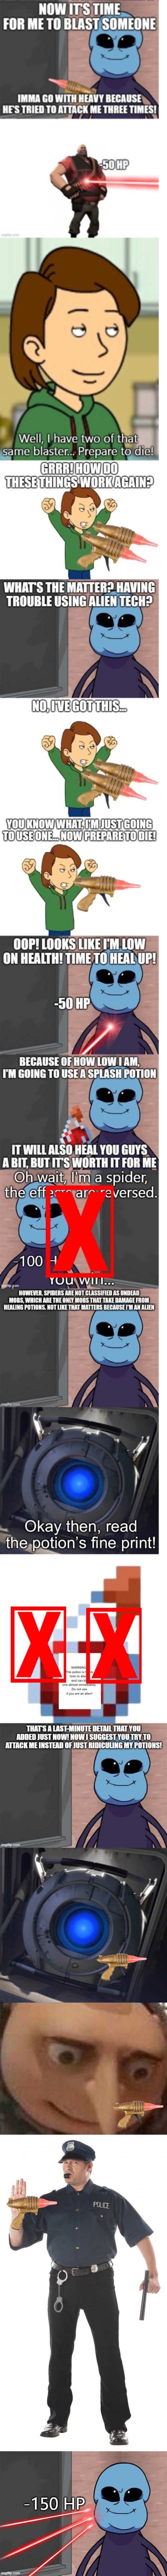 Unfortunately, Wheatley, Stop Cop, and Gru all have the same laser gun | -150 HP | image tagged in wheatley,gru meme,memes,stop cop,quiz | made w/ Imgflip meme maker